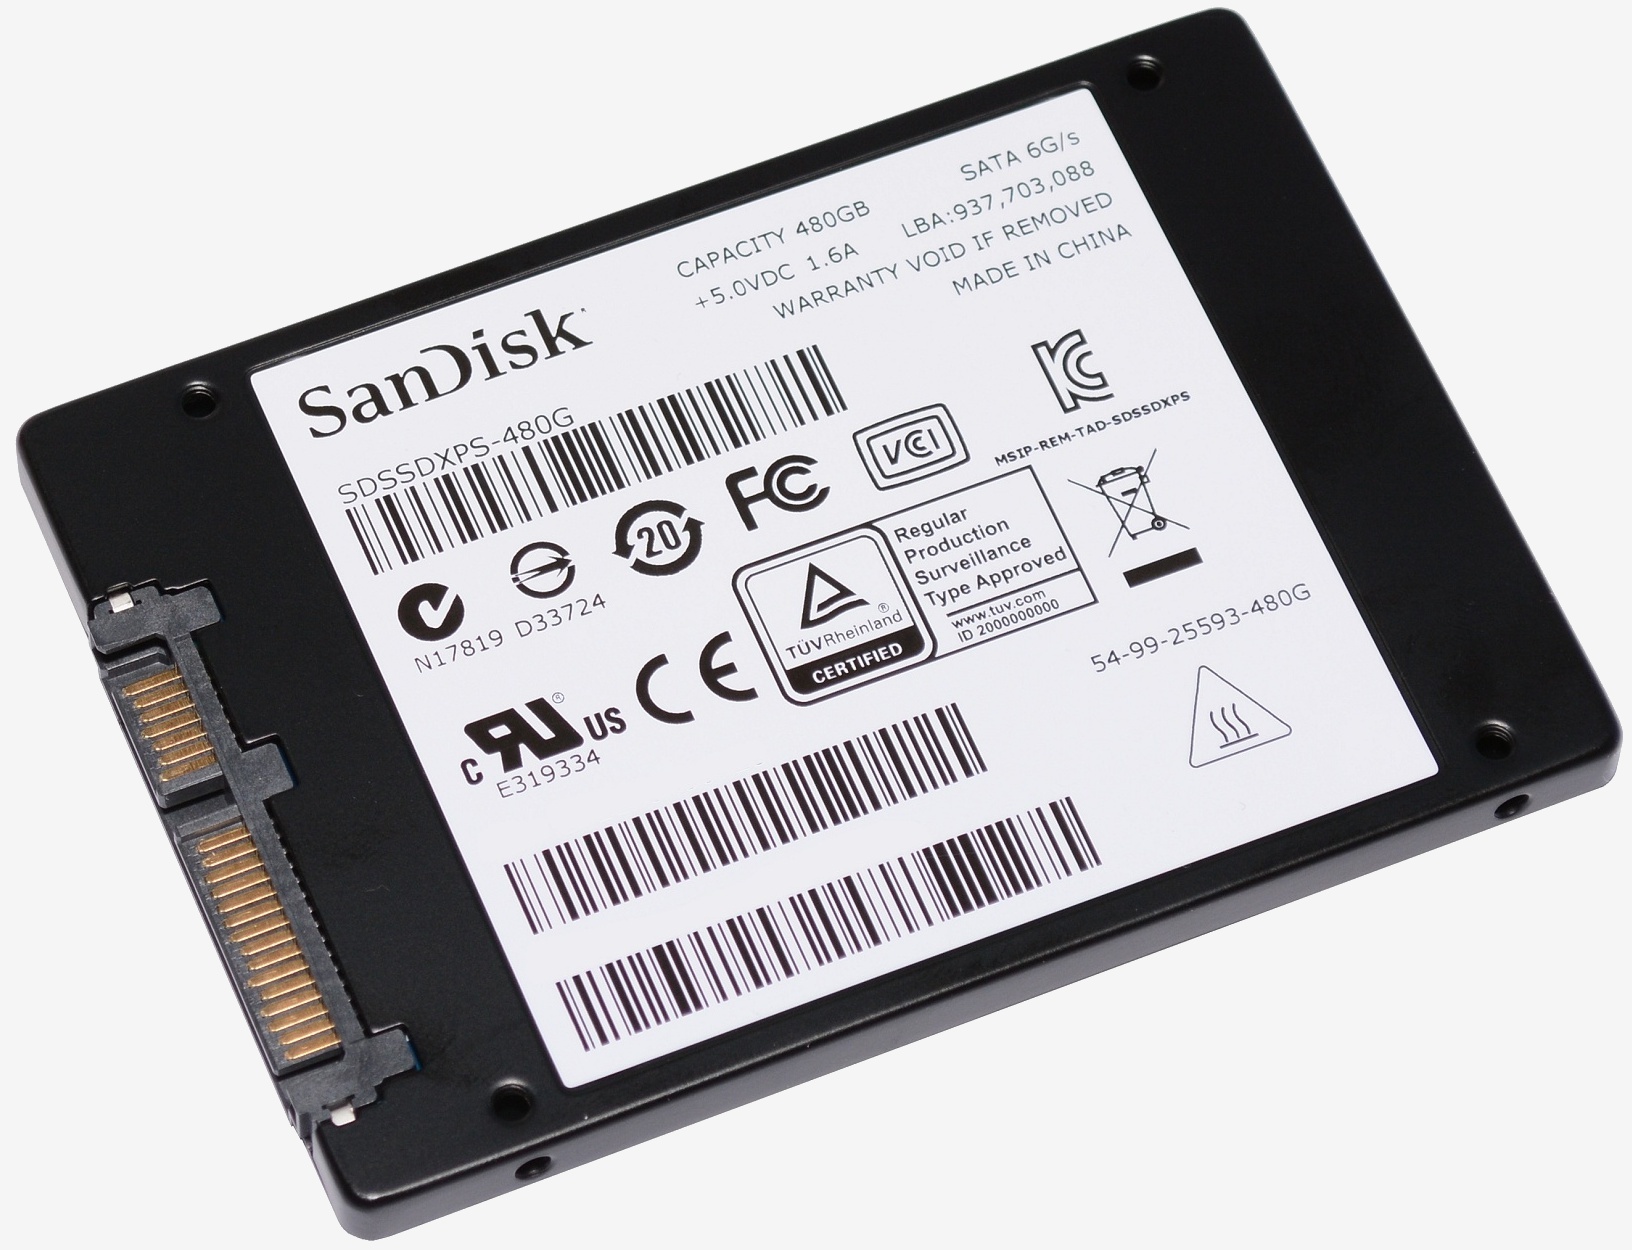 Say One night specify SanDisk Extreme Pro 480GB SSD Review | TechSpot